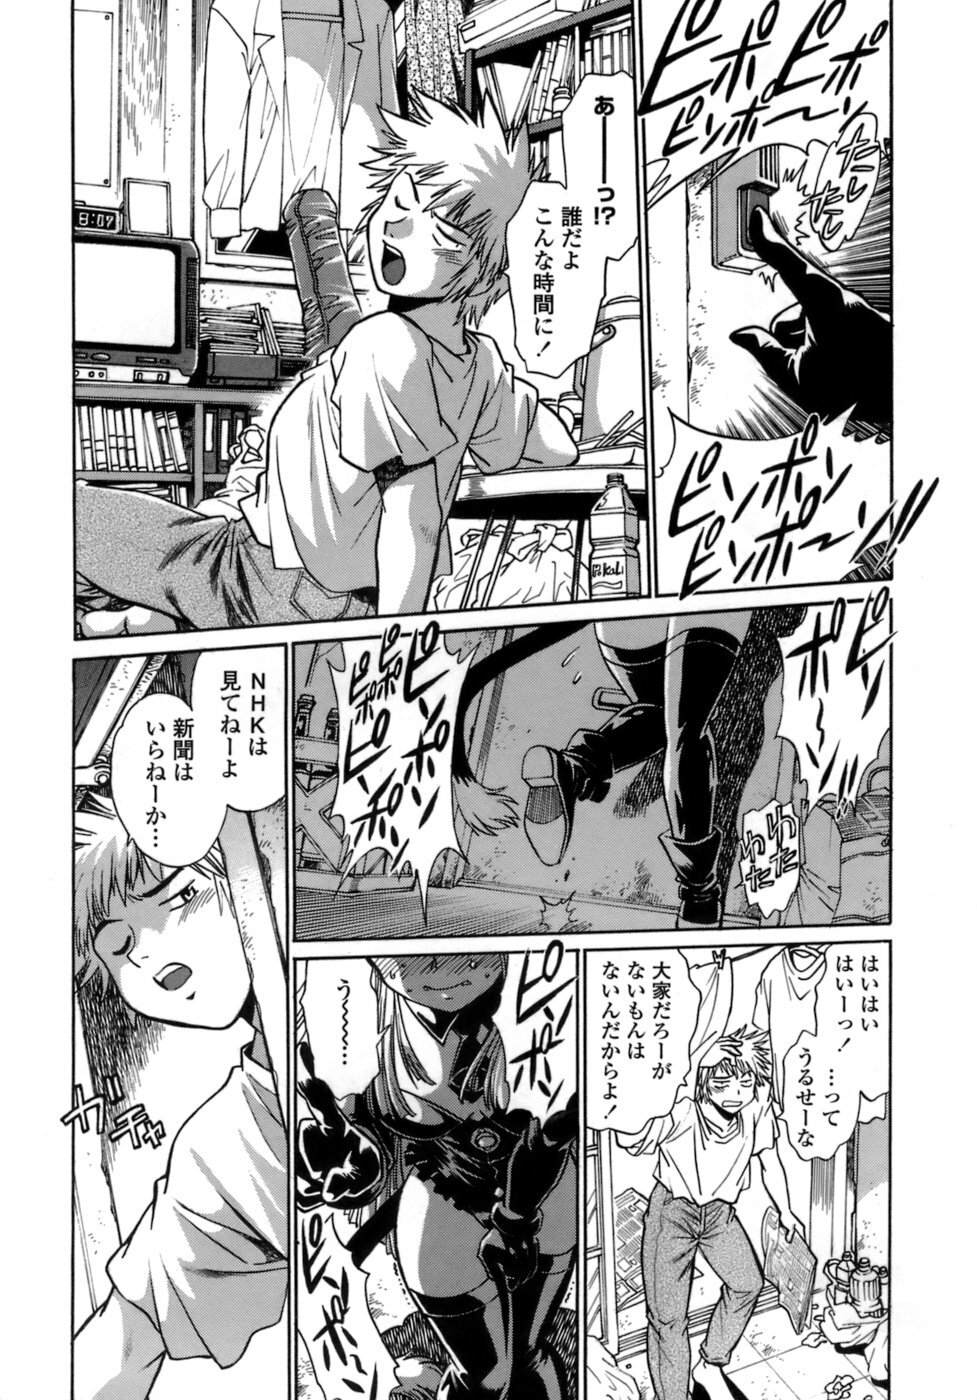 [Manabe Jouji] Tail Chaser 1 page 6 full